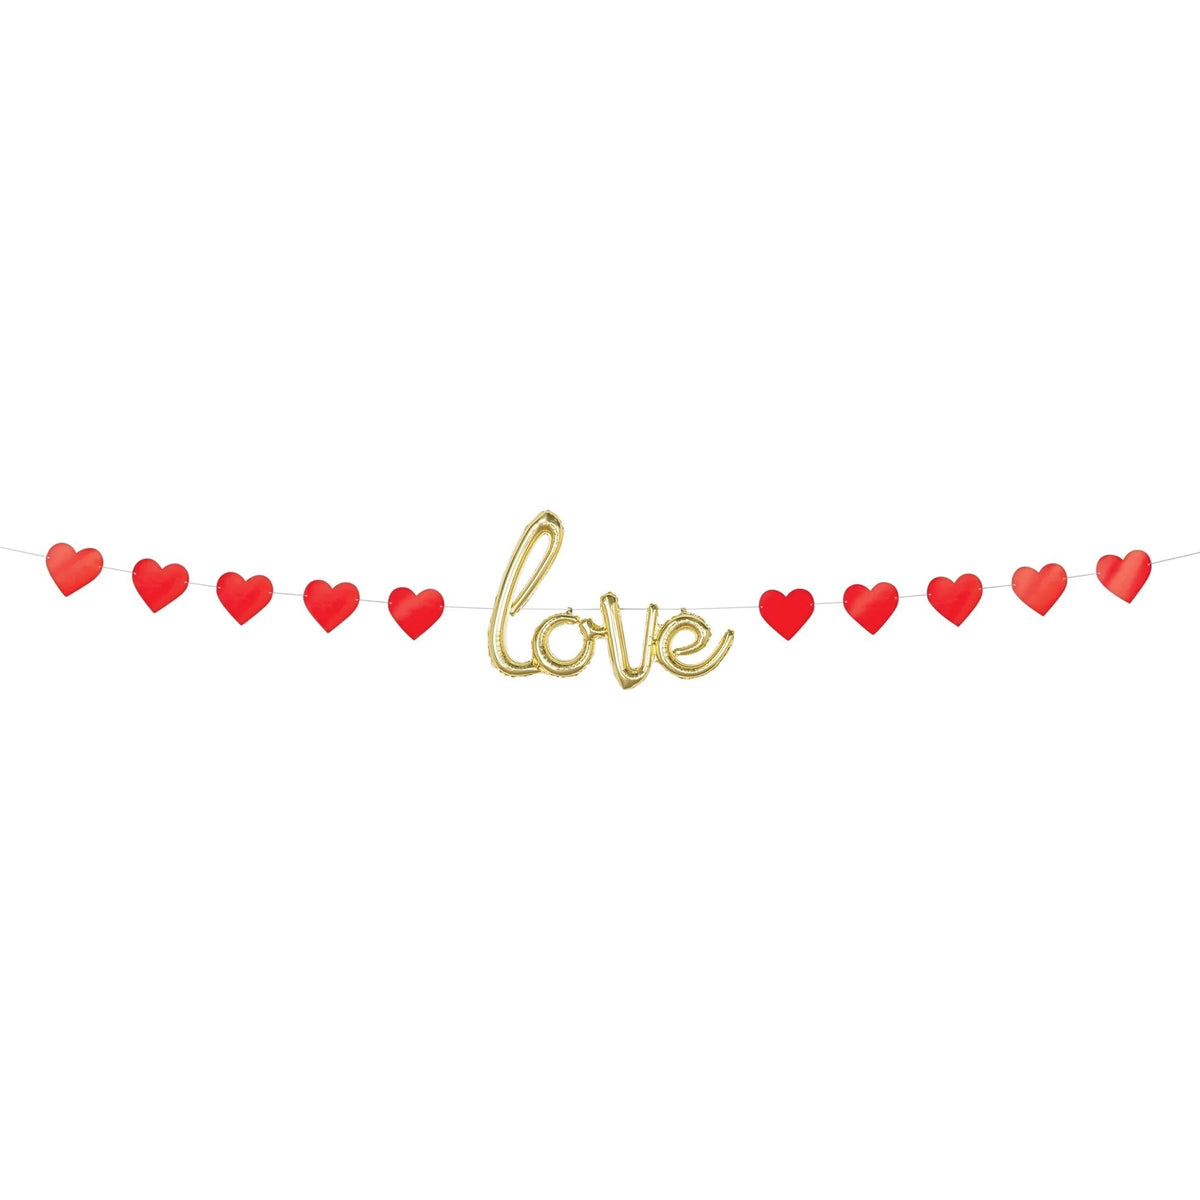 AMSCAN CA Valentine's Day Balloon Love Banner Kit, 192 Inches, 1 Count